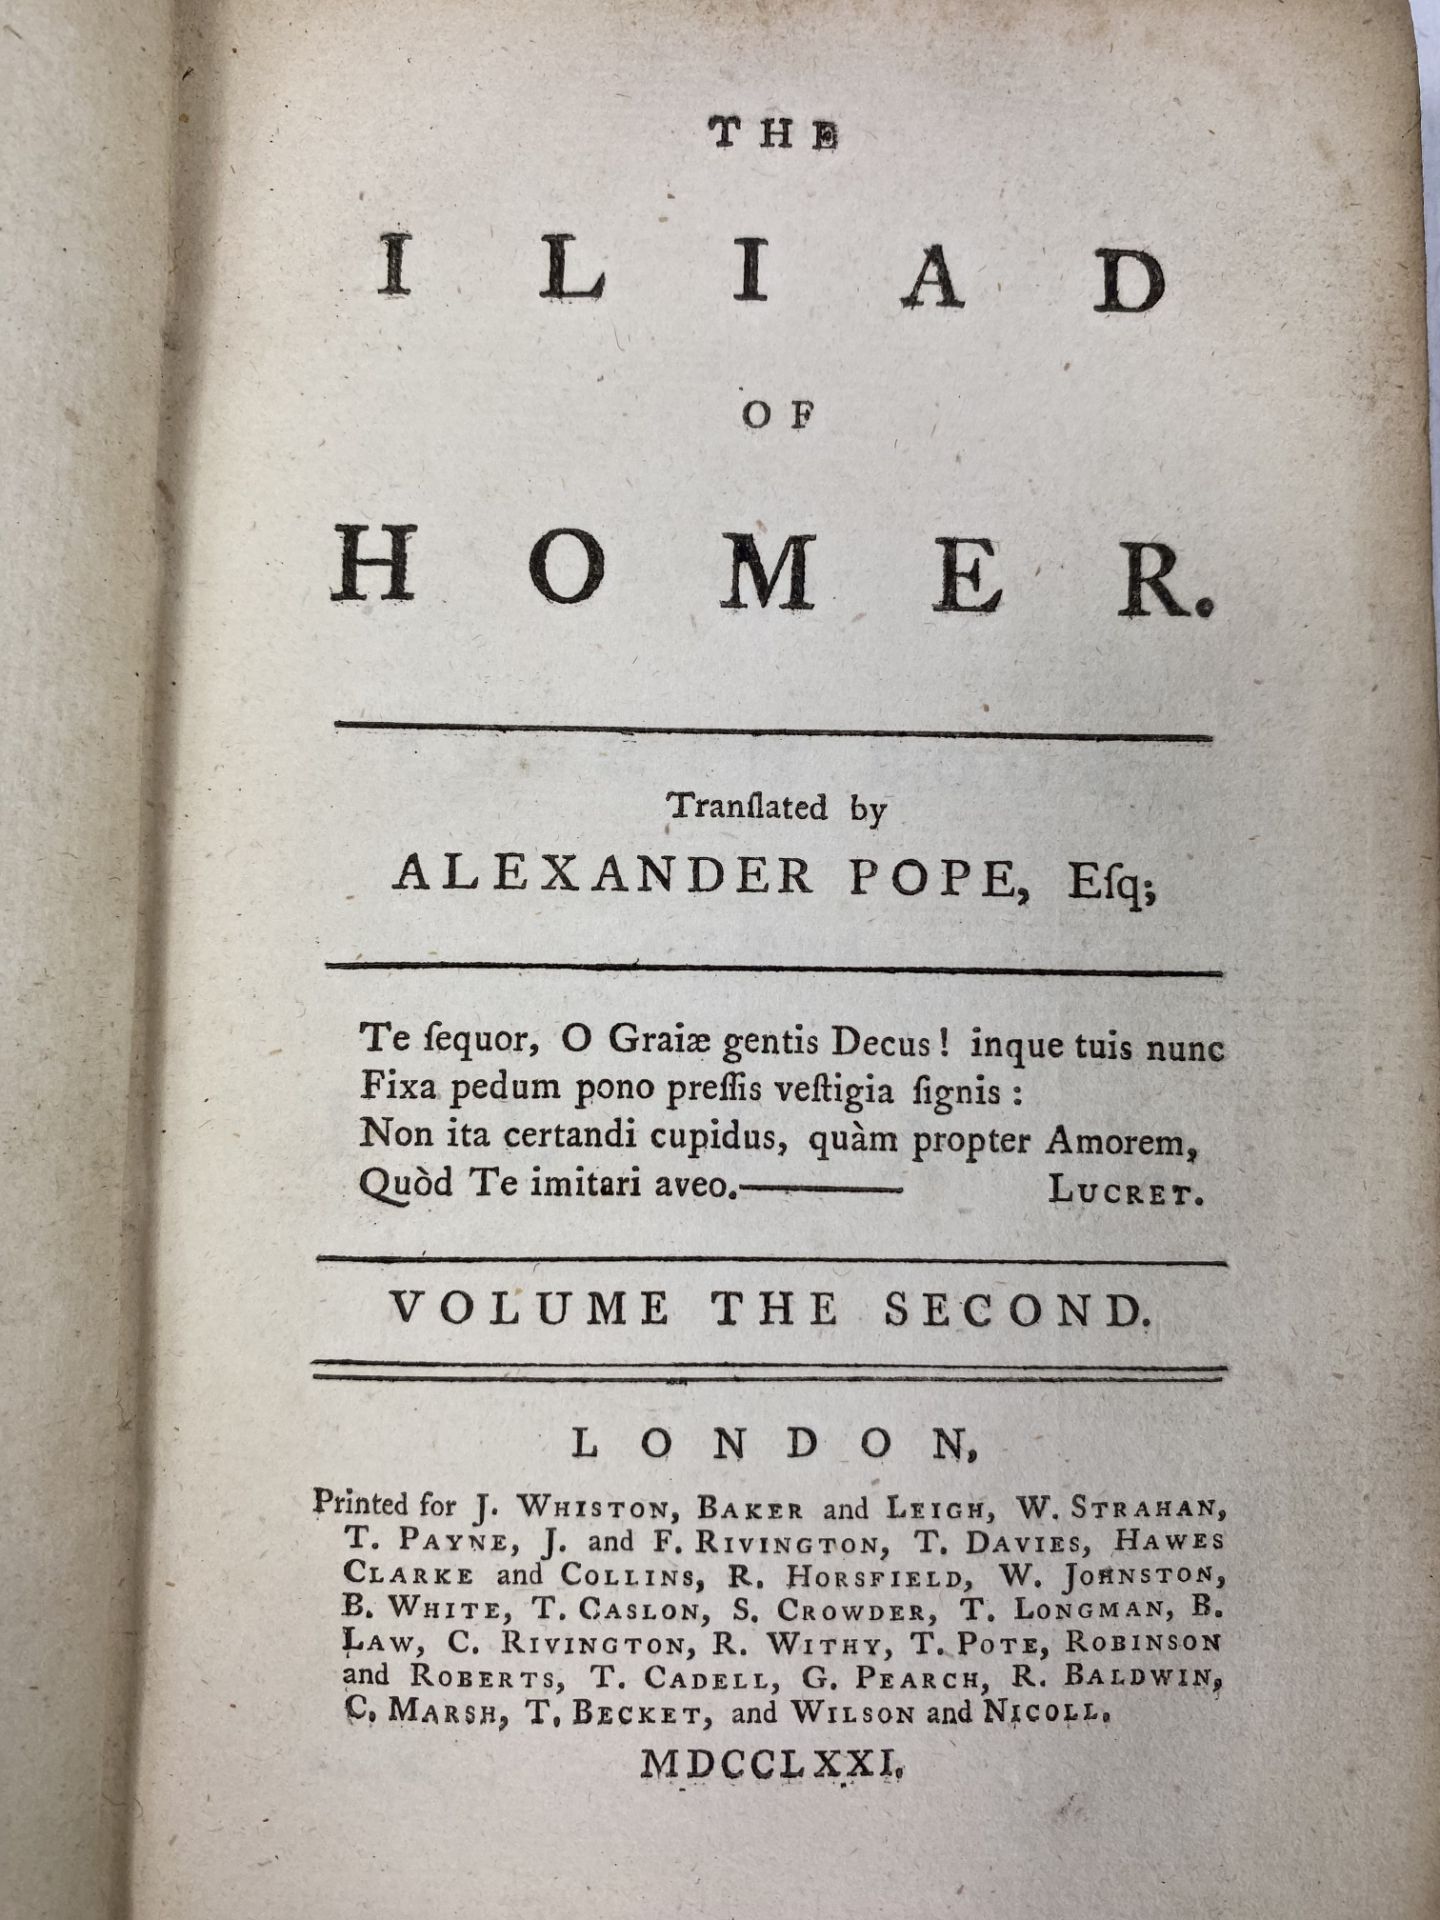 The Iliad of Homer translated by Alexander Pope, 1771 - Image 2 of 2